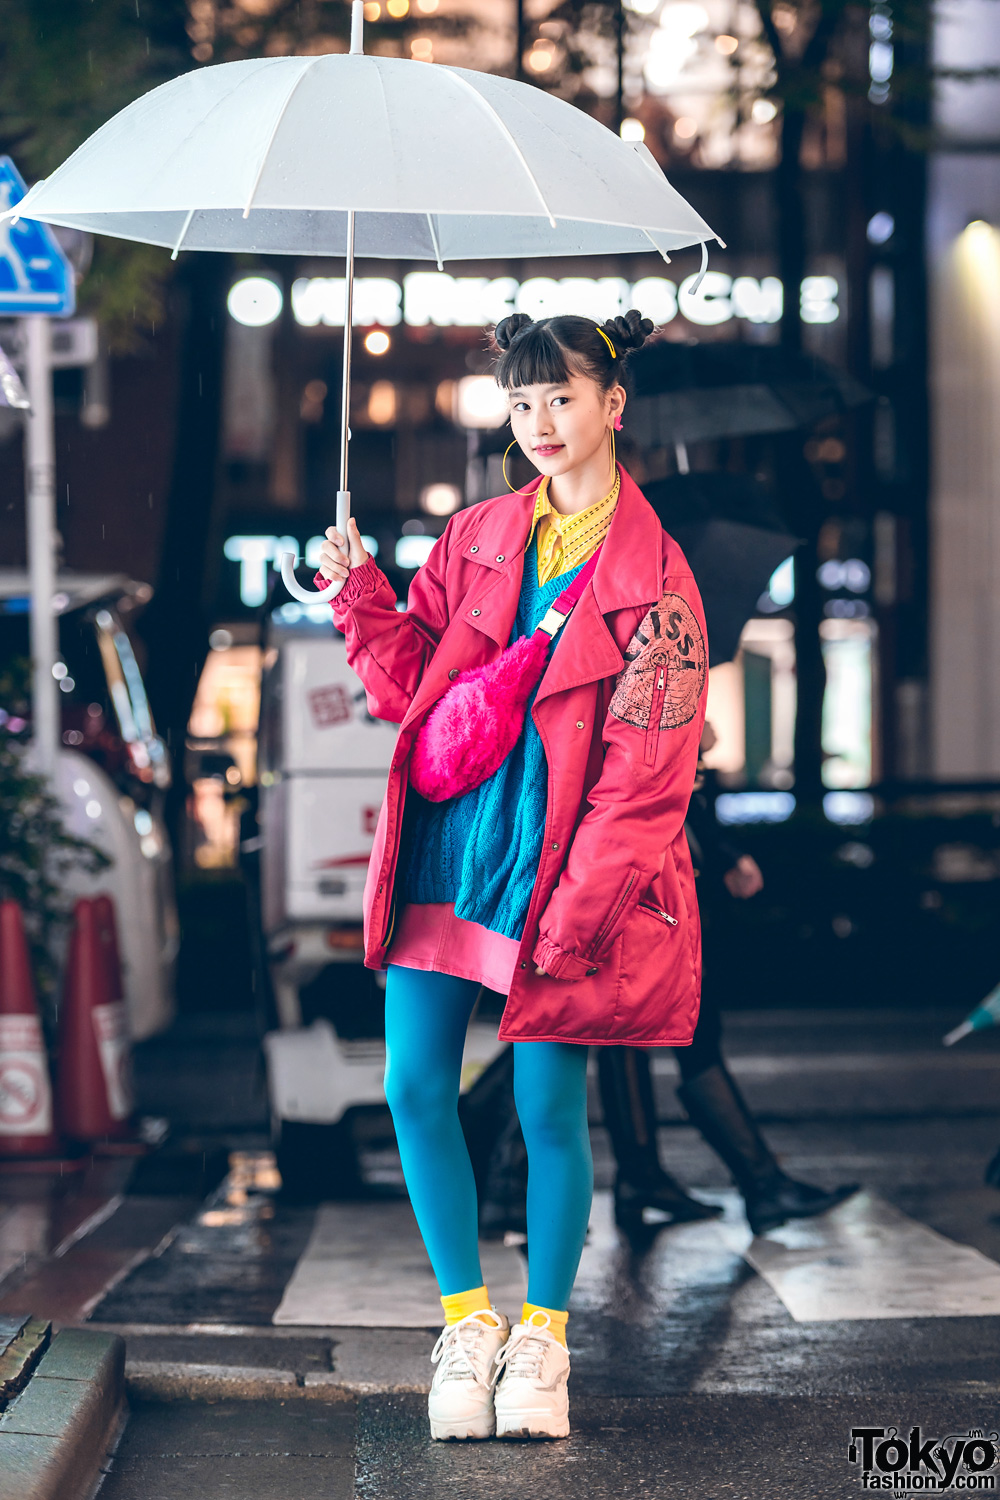 Tokyo Fashion: 14-year-old Japanese model and aspiring actress A-pon  (@a_ponnnn) on the street  - Alo Japan